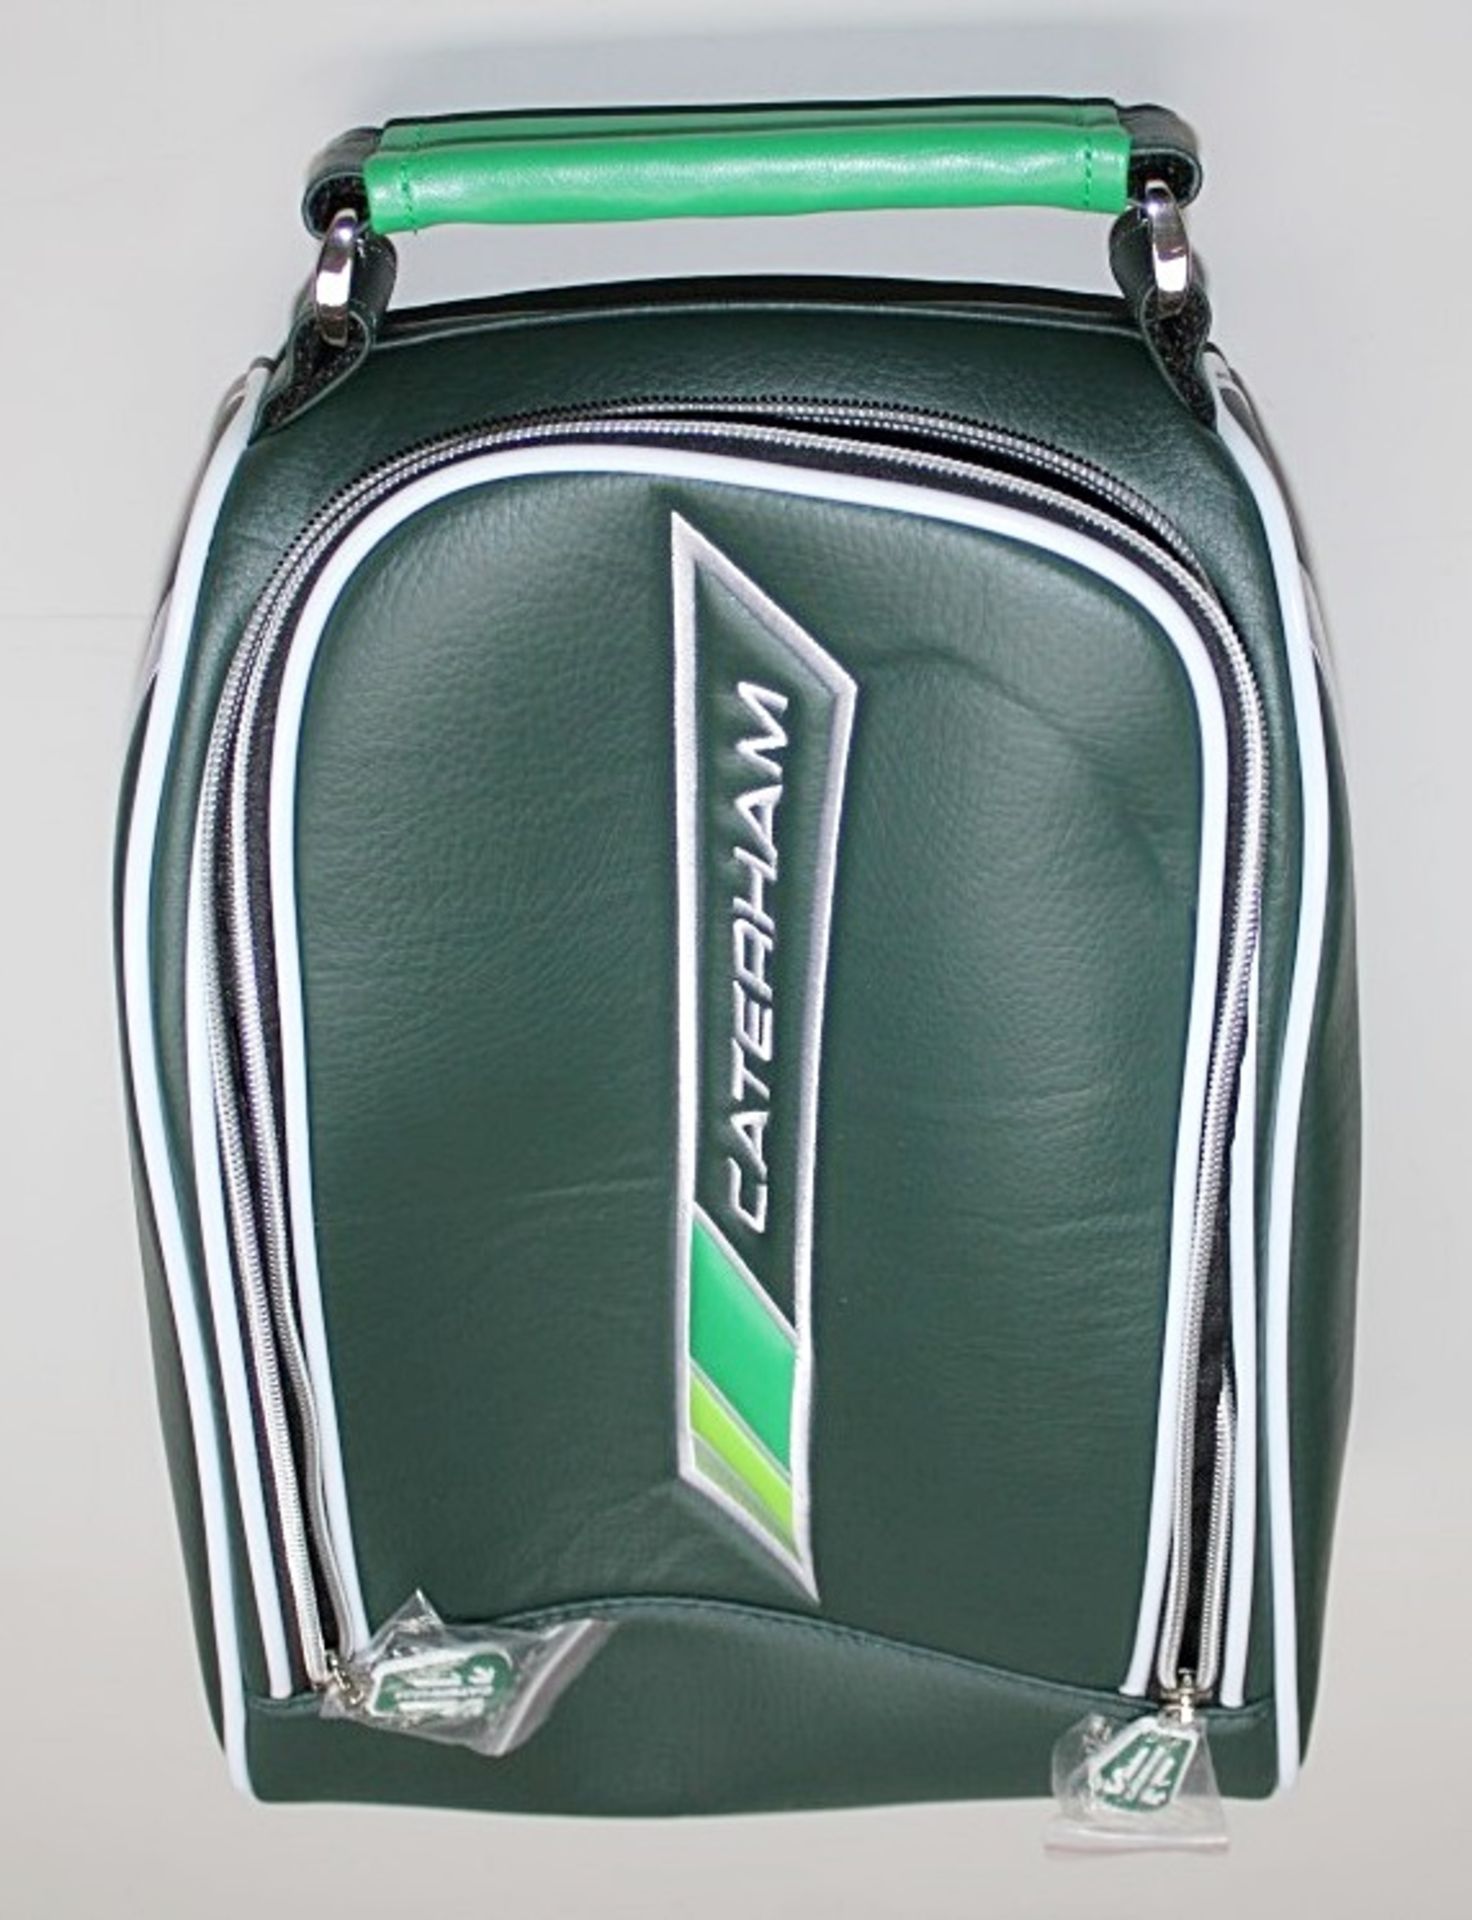 5 x Caterham F1 Team Multipurpose Carry / Shoe Bag In Green Faux Leather - 25 x 12 x 35cm - With